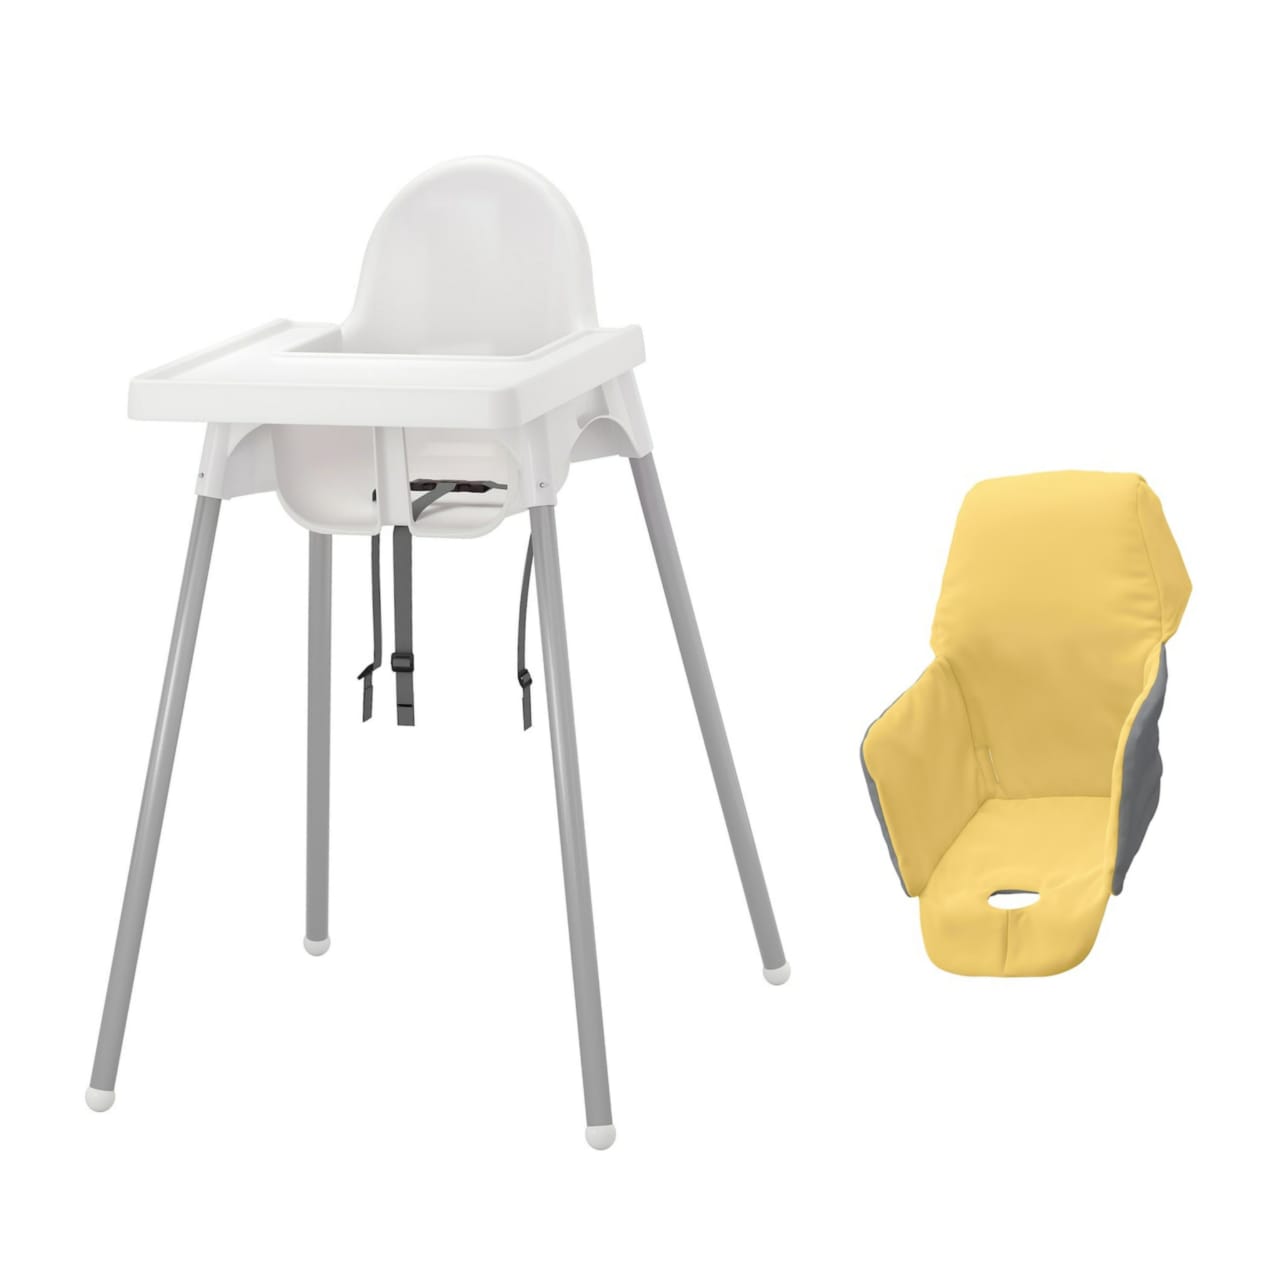 IKEA ANTILOP HIGH CHAIR WHITE WITH CUSHION YELLOW